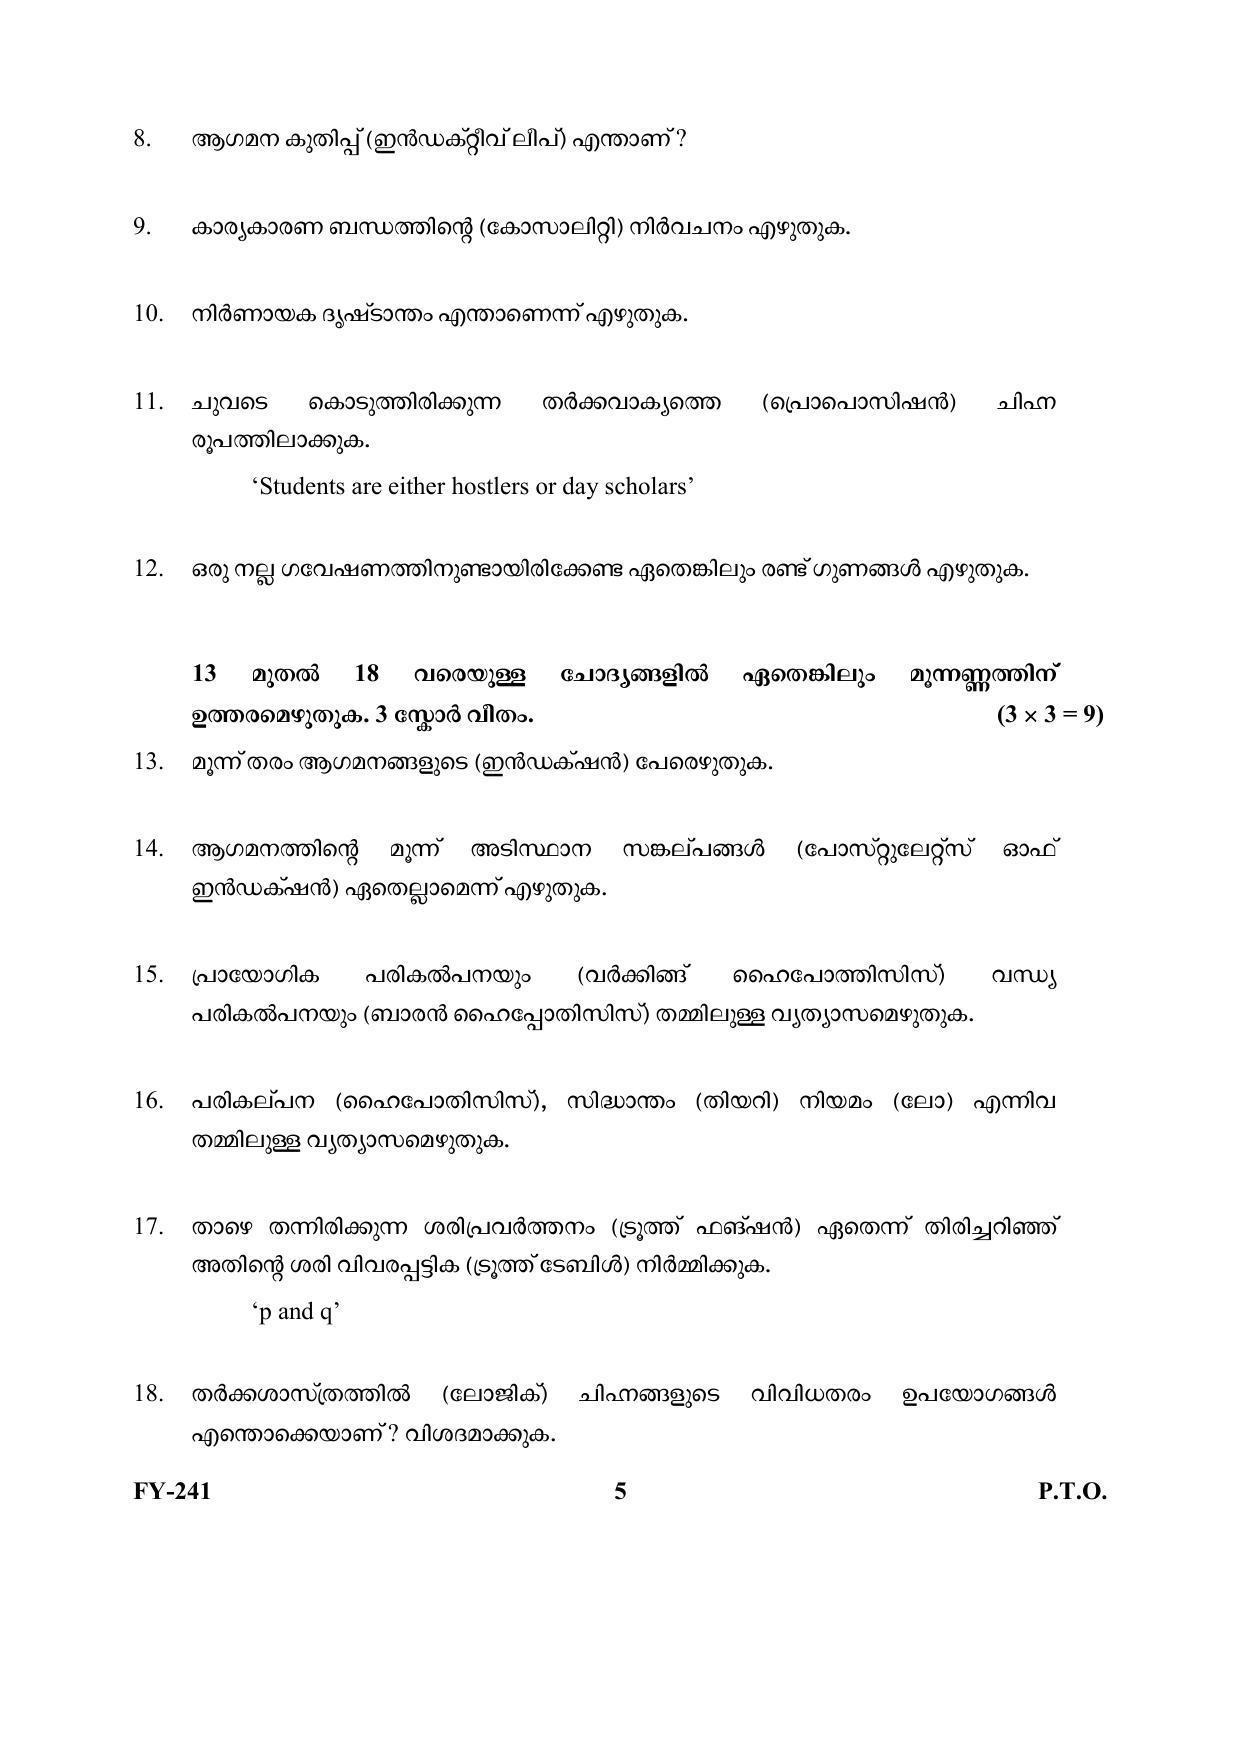 Kerala Plus One (Class 11th) Philosaphy Question Paper 2021 - Page 5